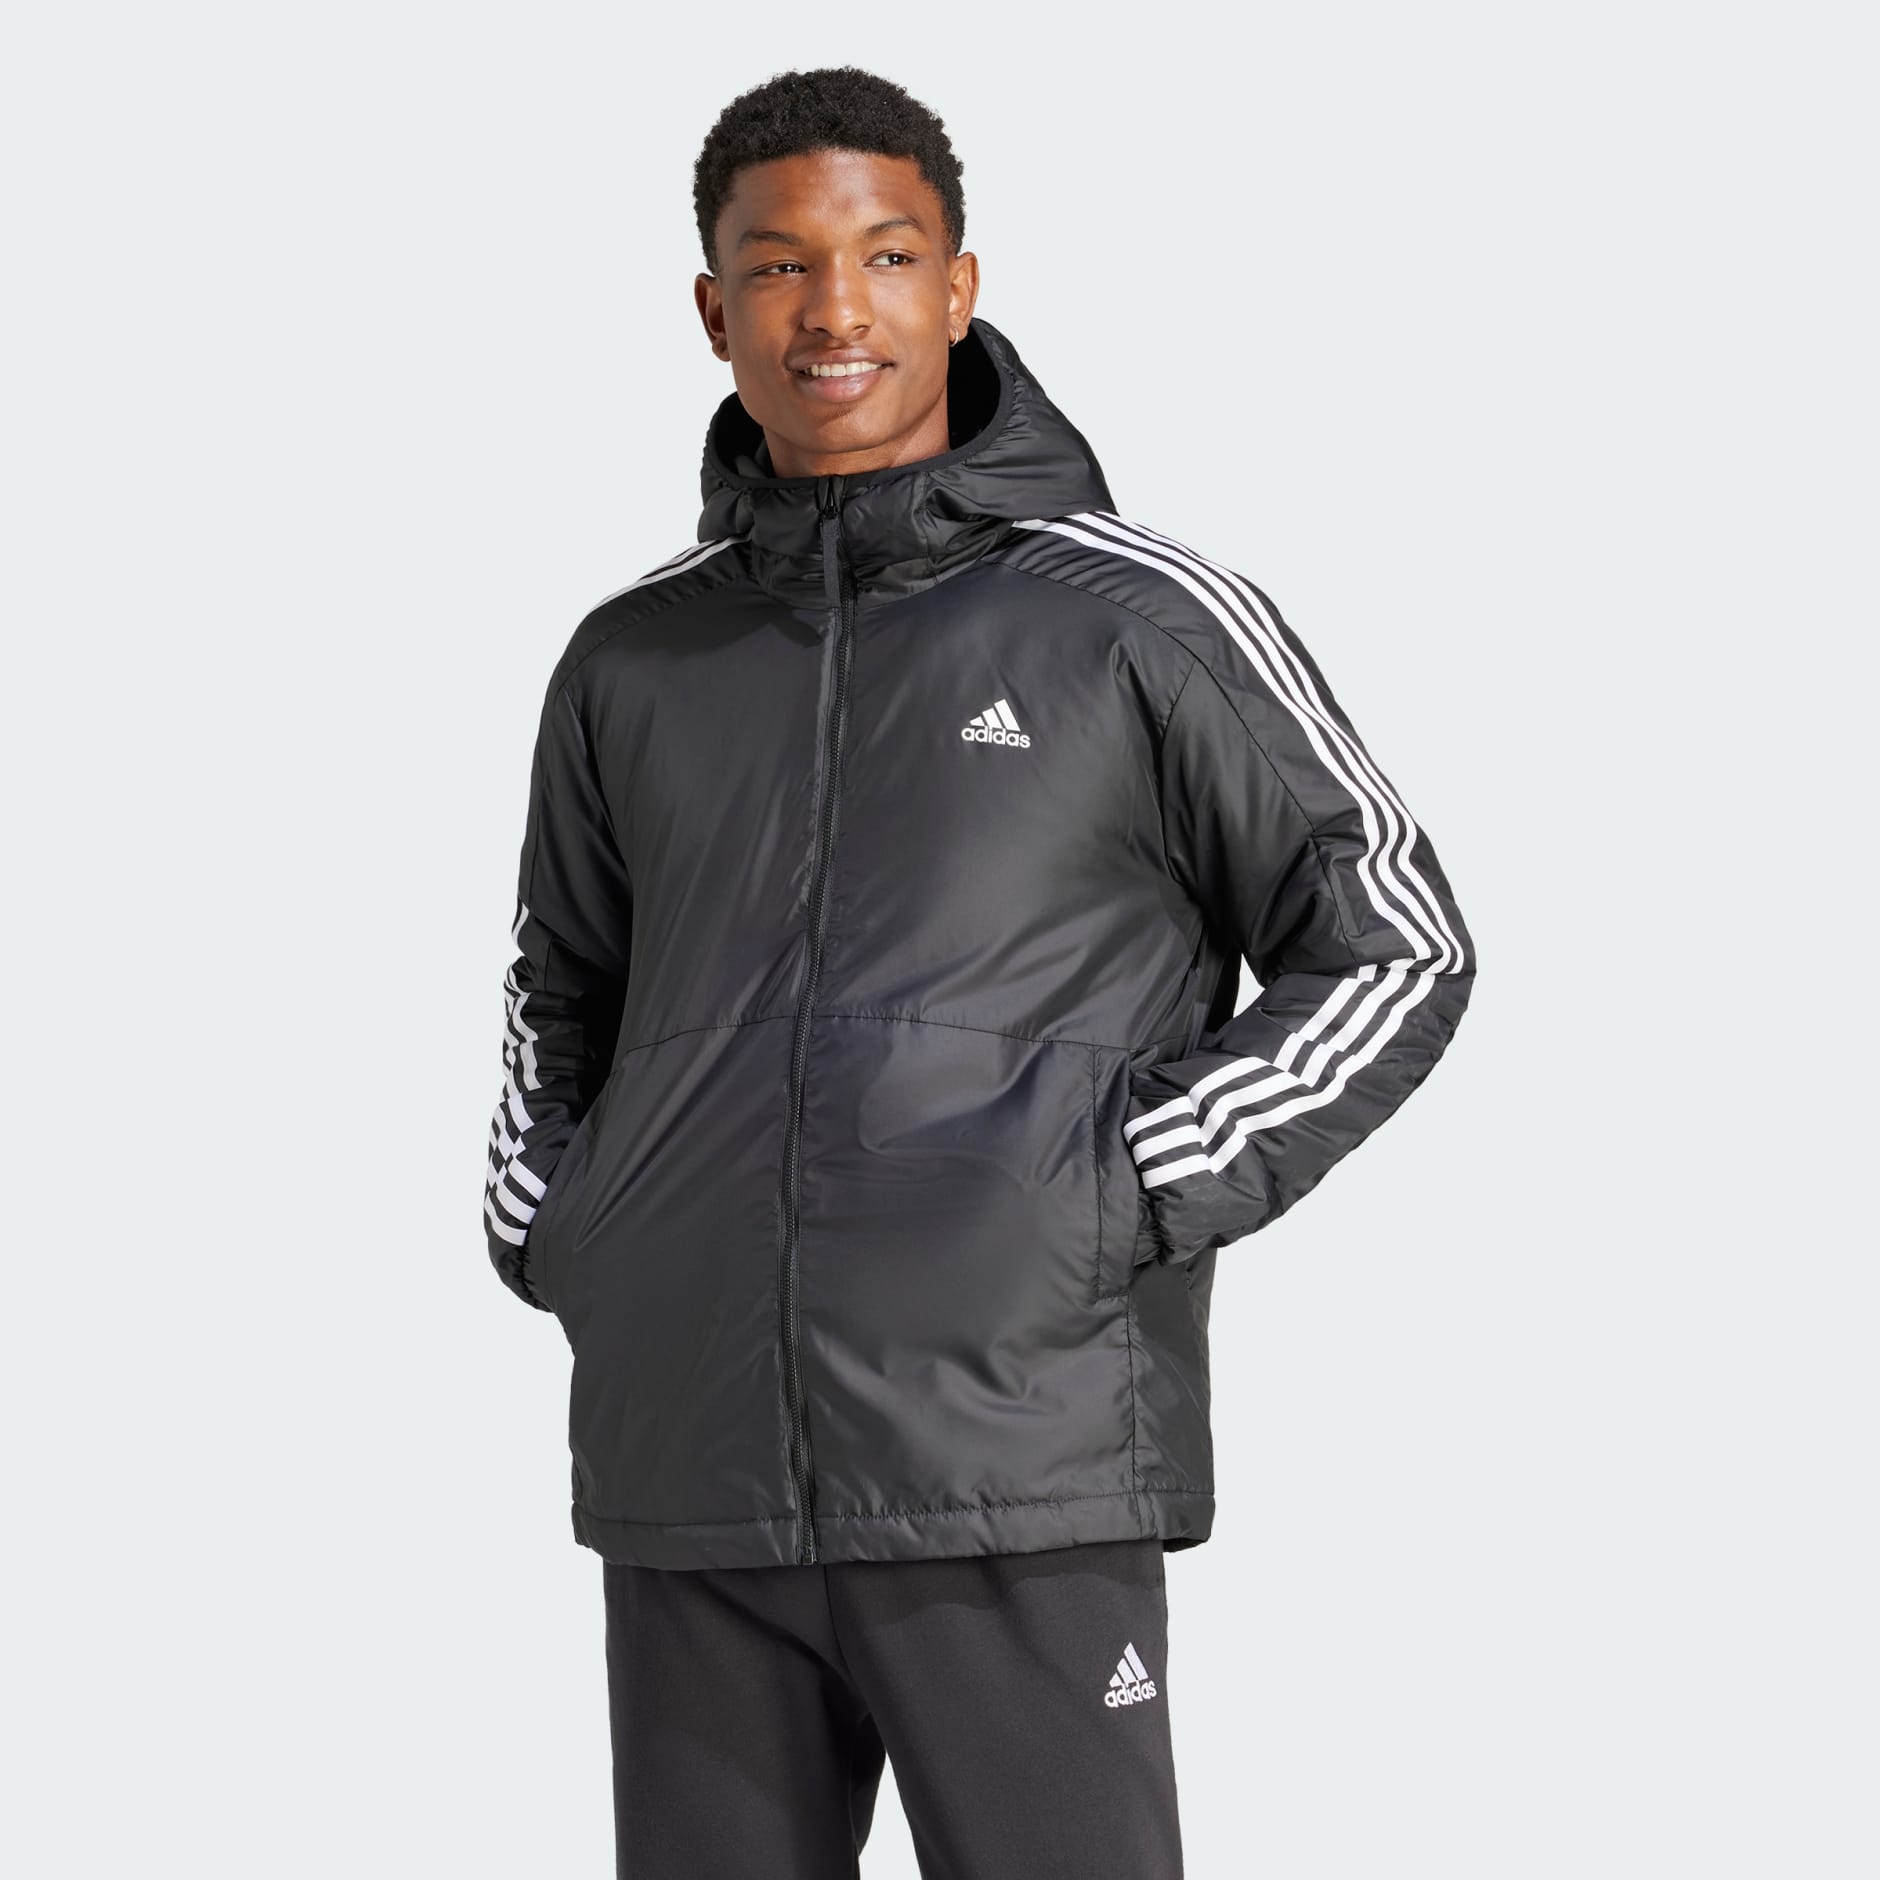 adidas outdoor Men's Urban Climaproof Rain Jacket, Active Gold, Small :  Amazon.in: Clothing & Accessories